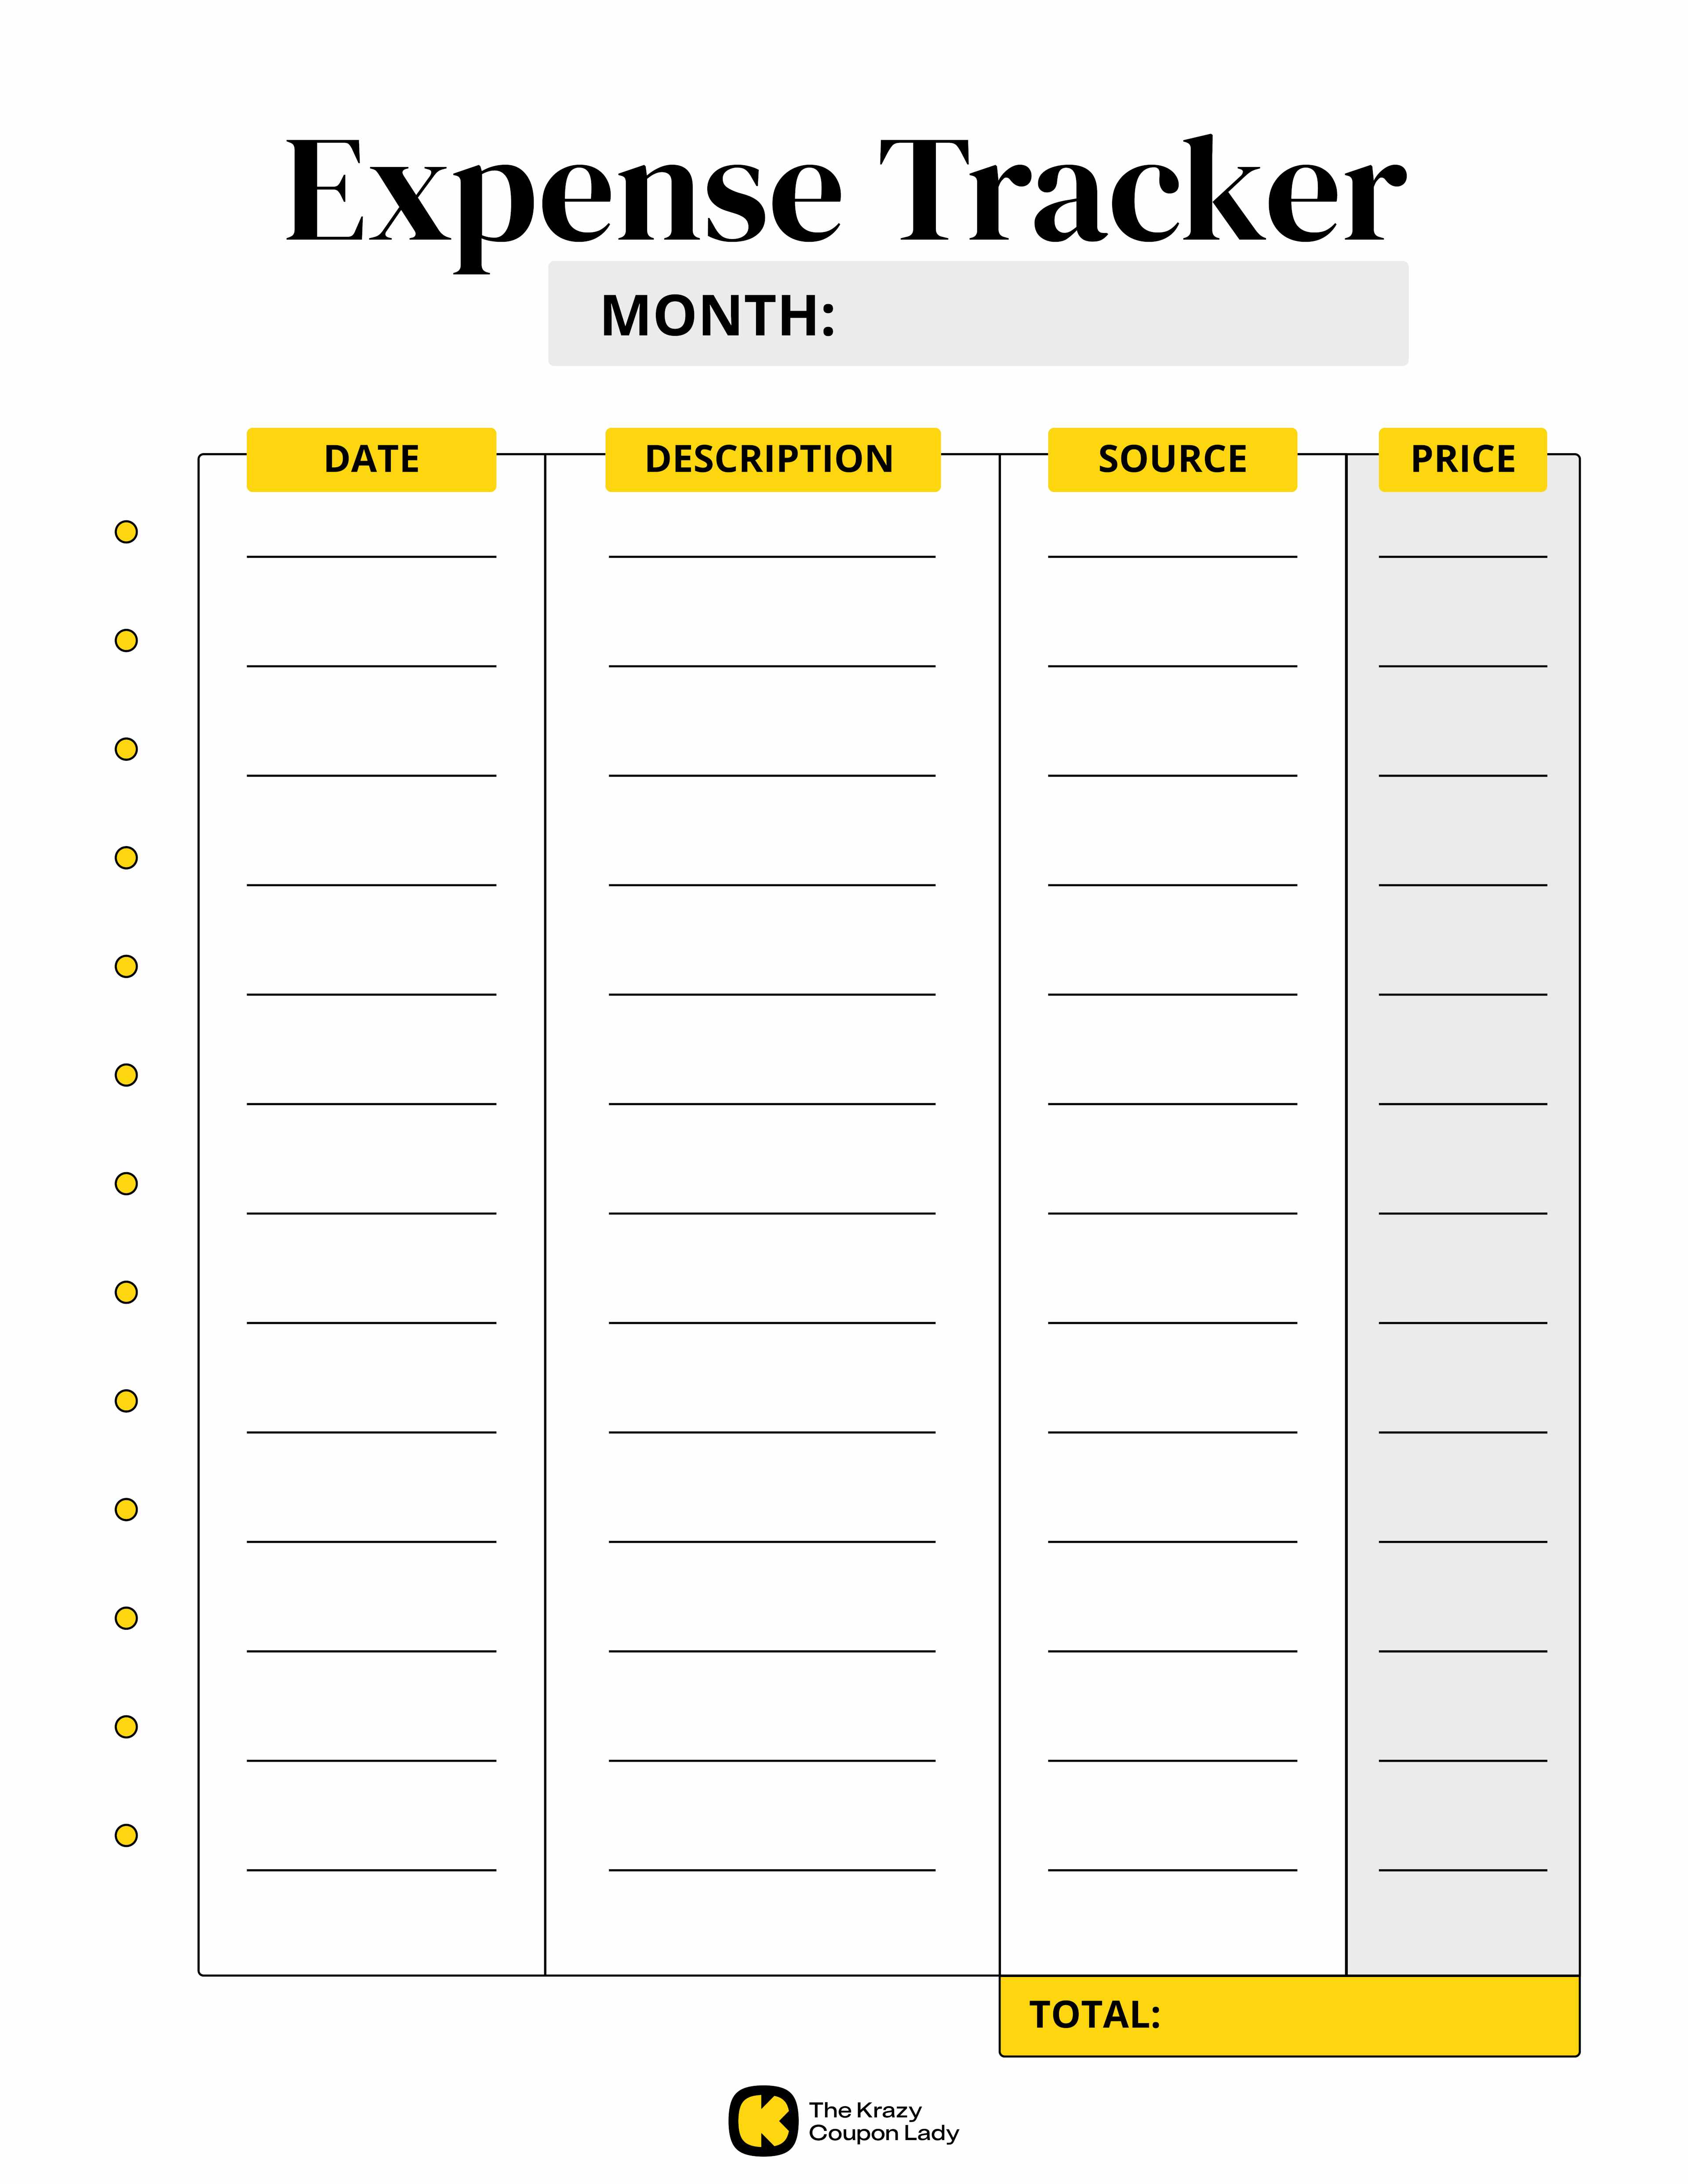 a monthly expense tracker from KCL